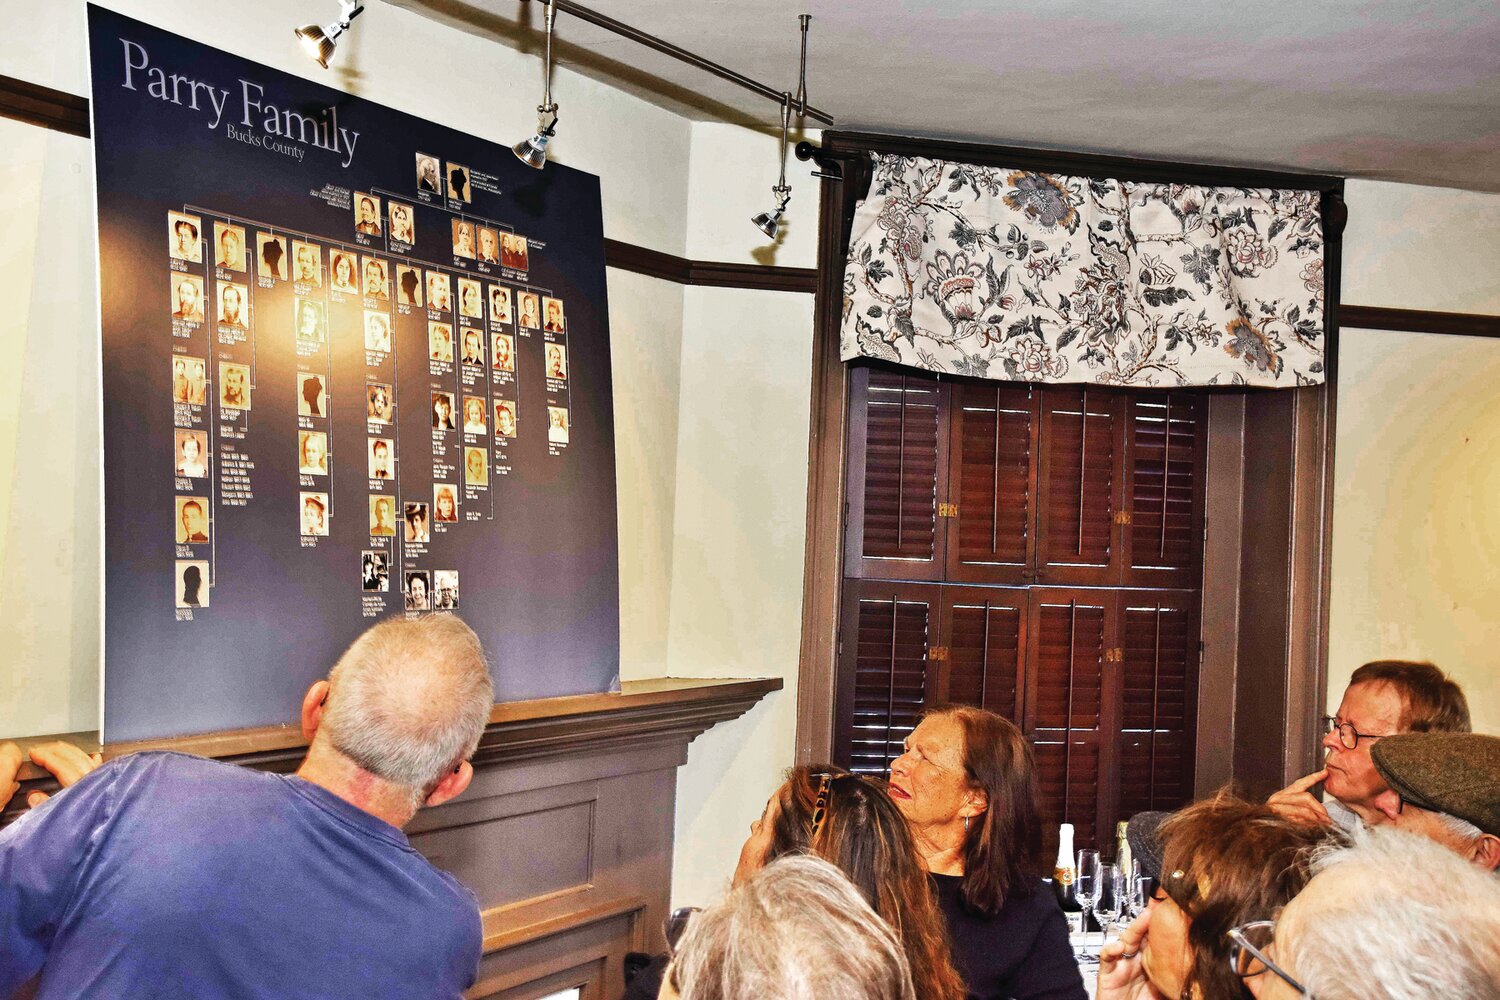 Visitors look at the Parry family tree.